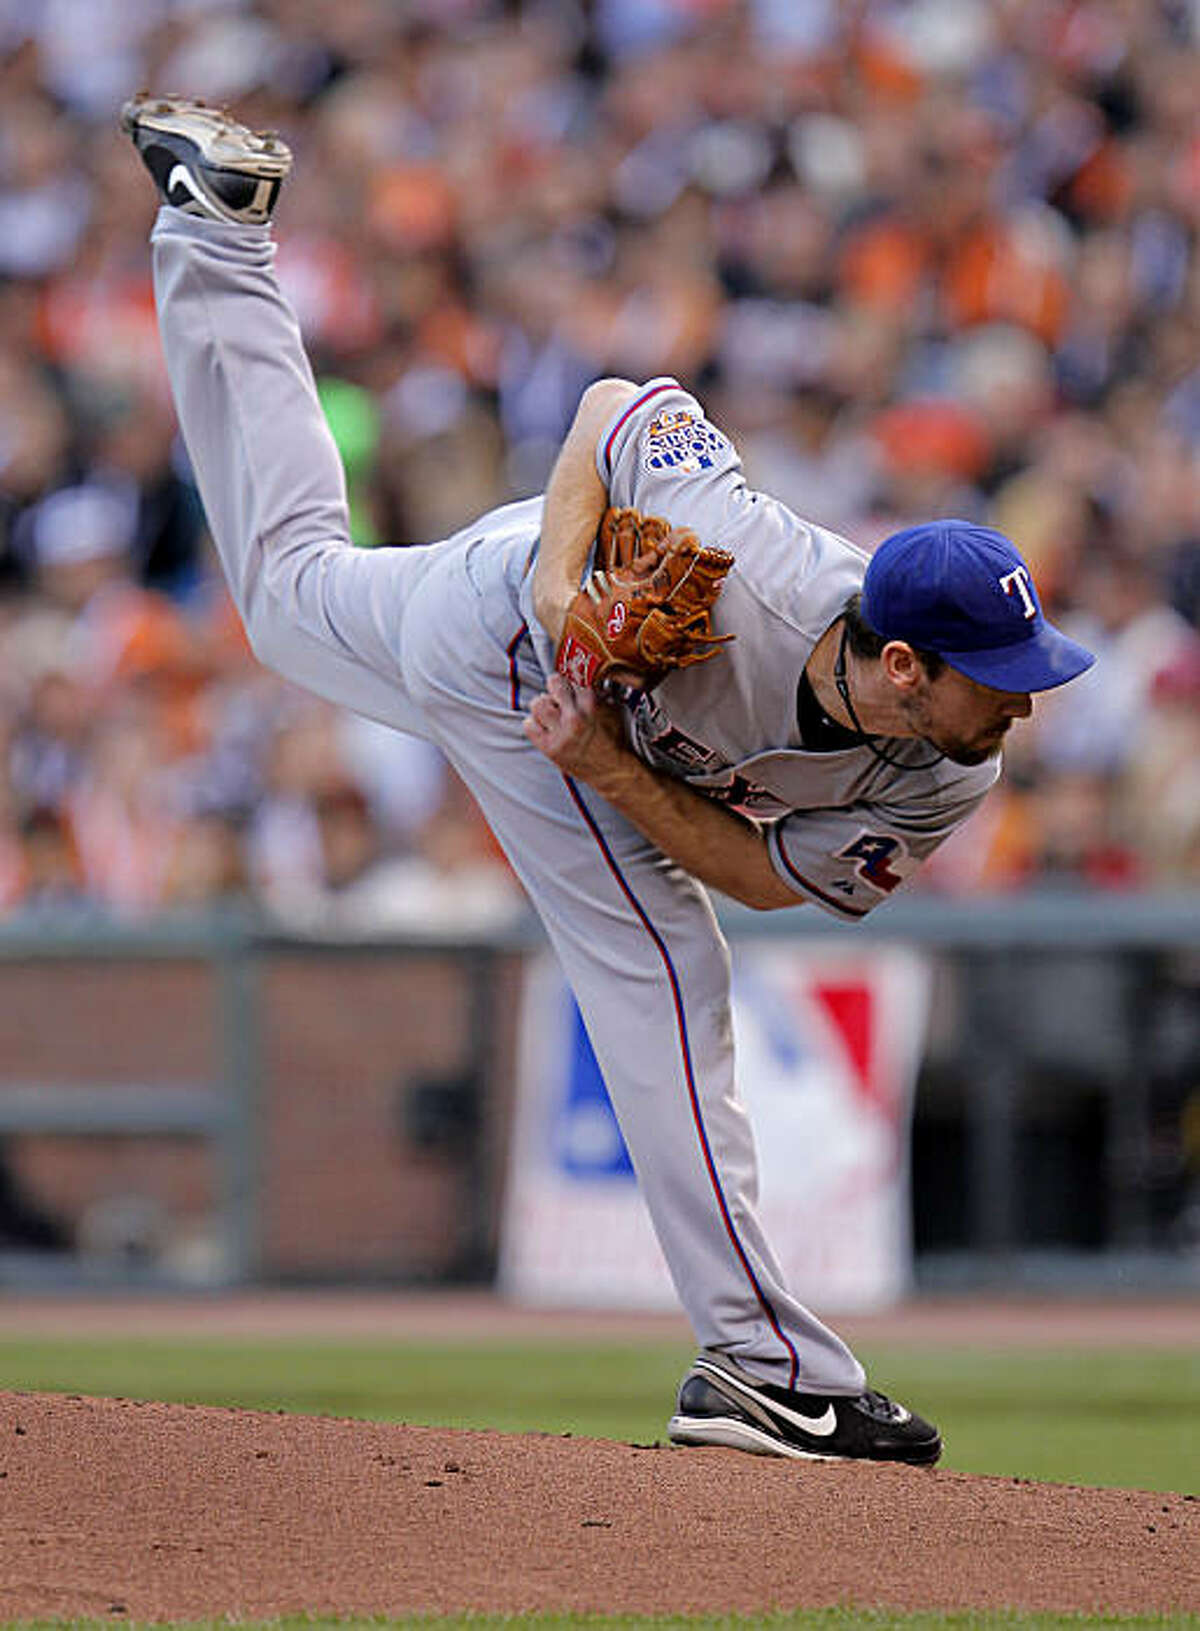 Rangers starting pitcher Cliff Lee throws in the first inning as the San Francisco Giants take on the Texas Rangers in Game 1 of the World Series at AT&T Park in San Francisco, Calif., on Wednesday, October 27, 2010.